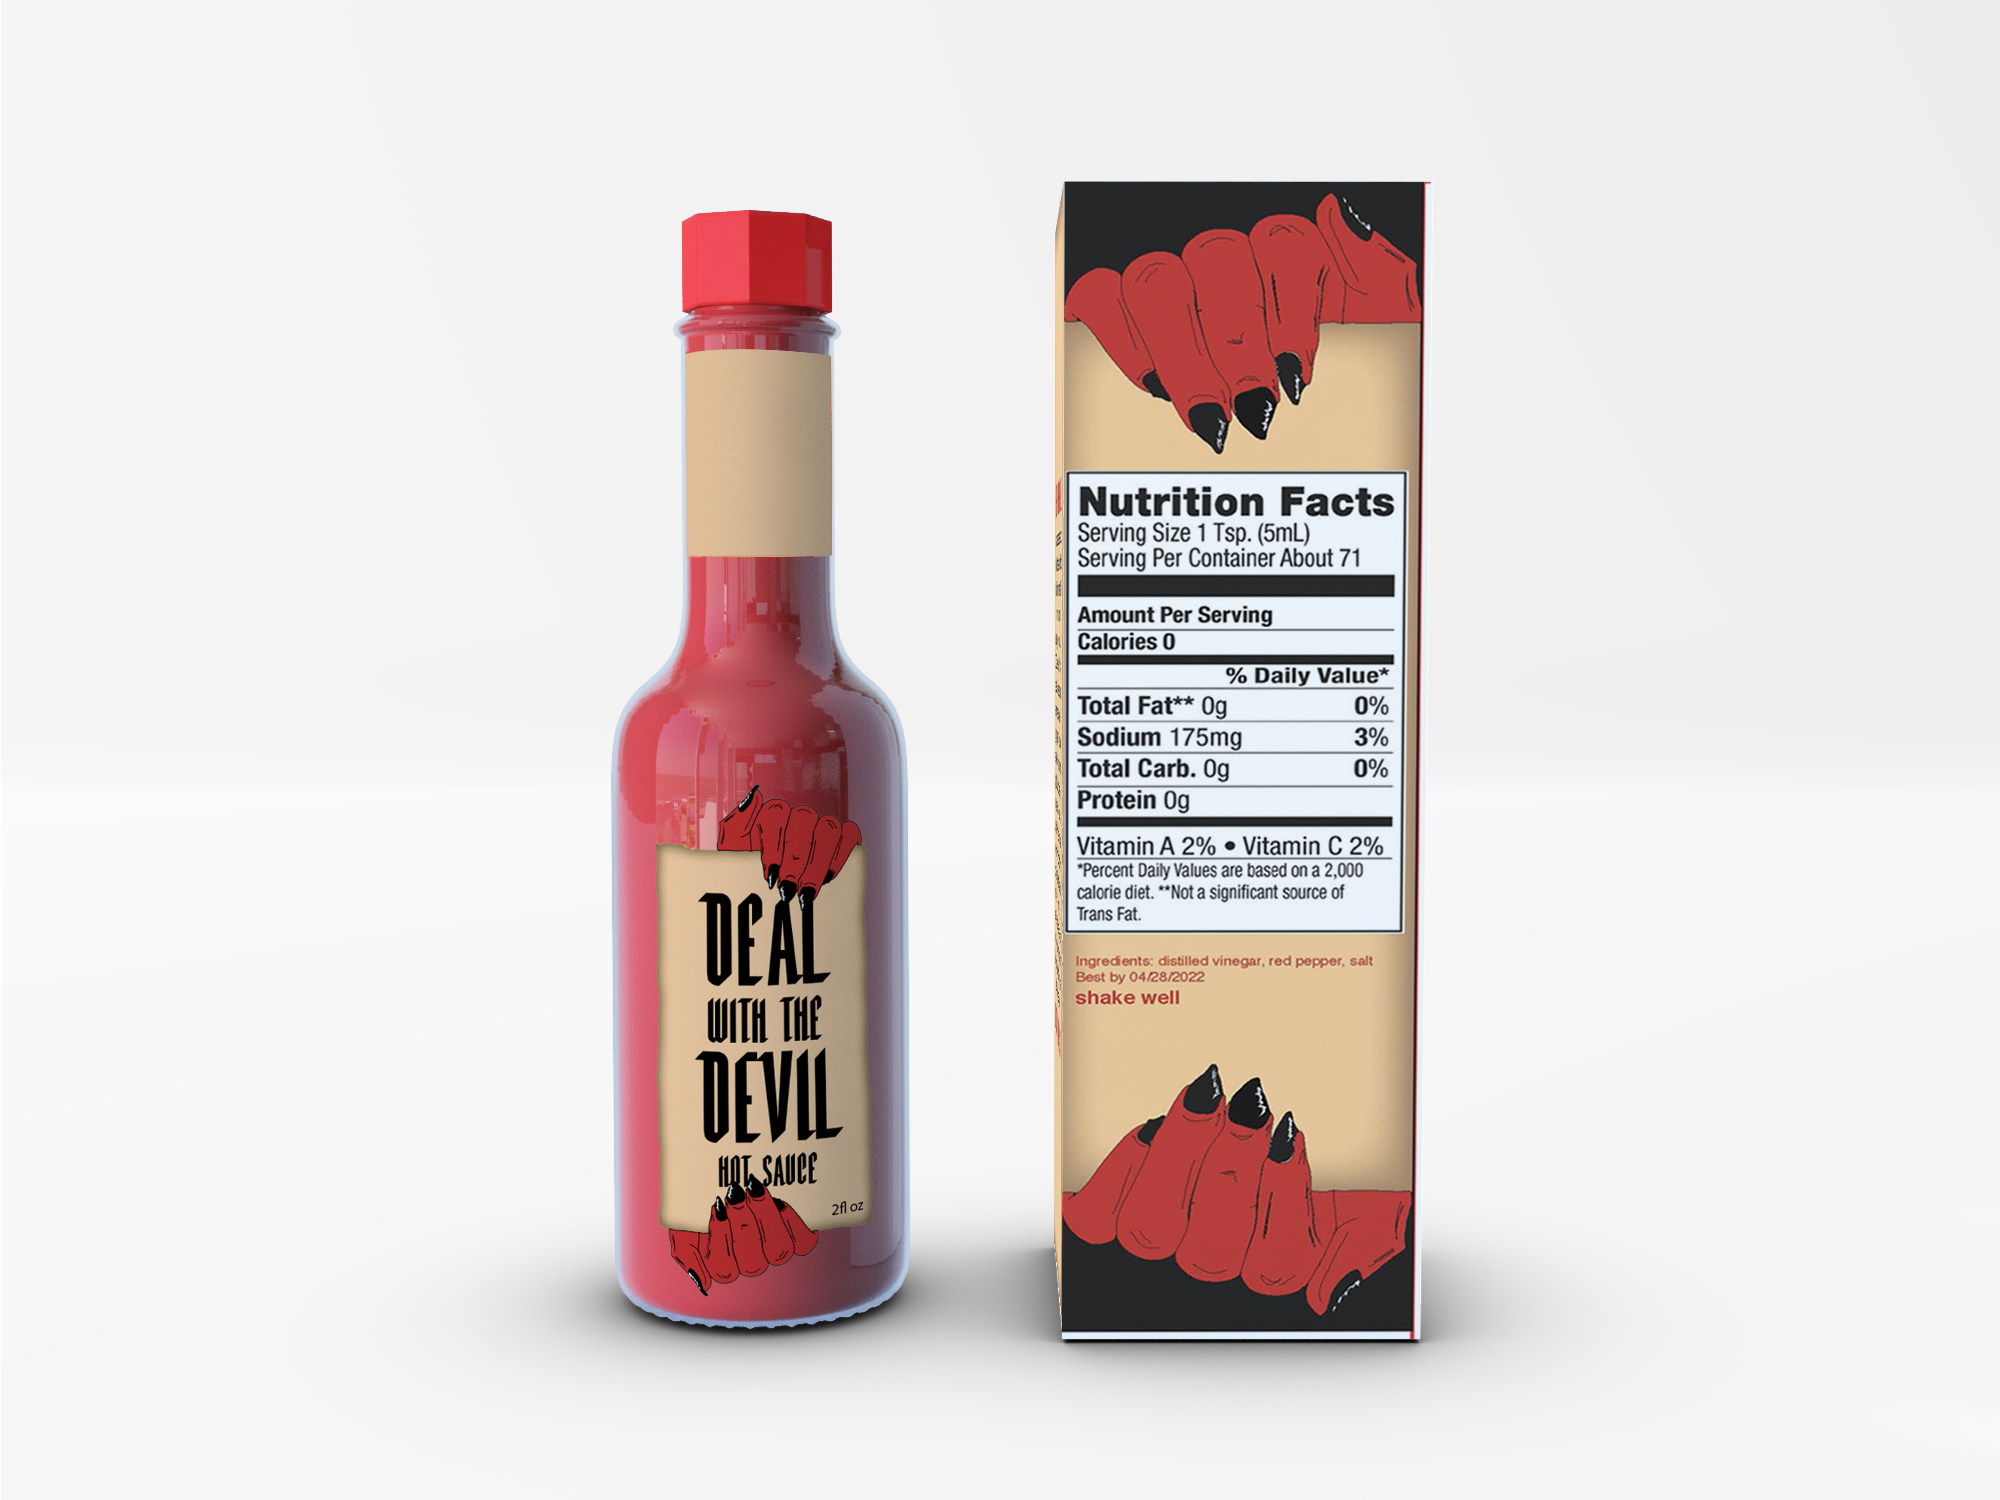 Deal with the devil mockup 1.jpg